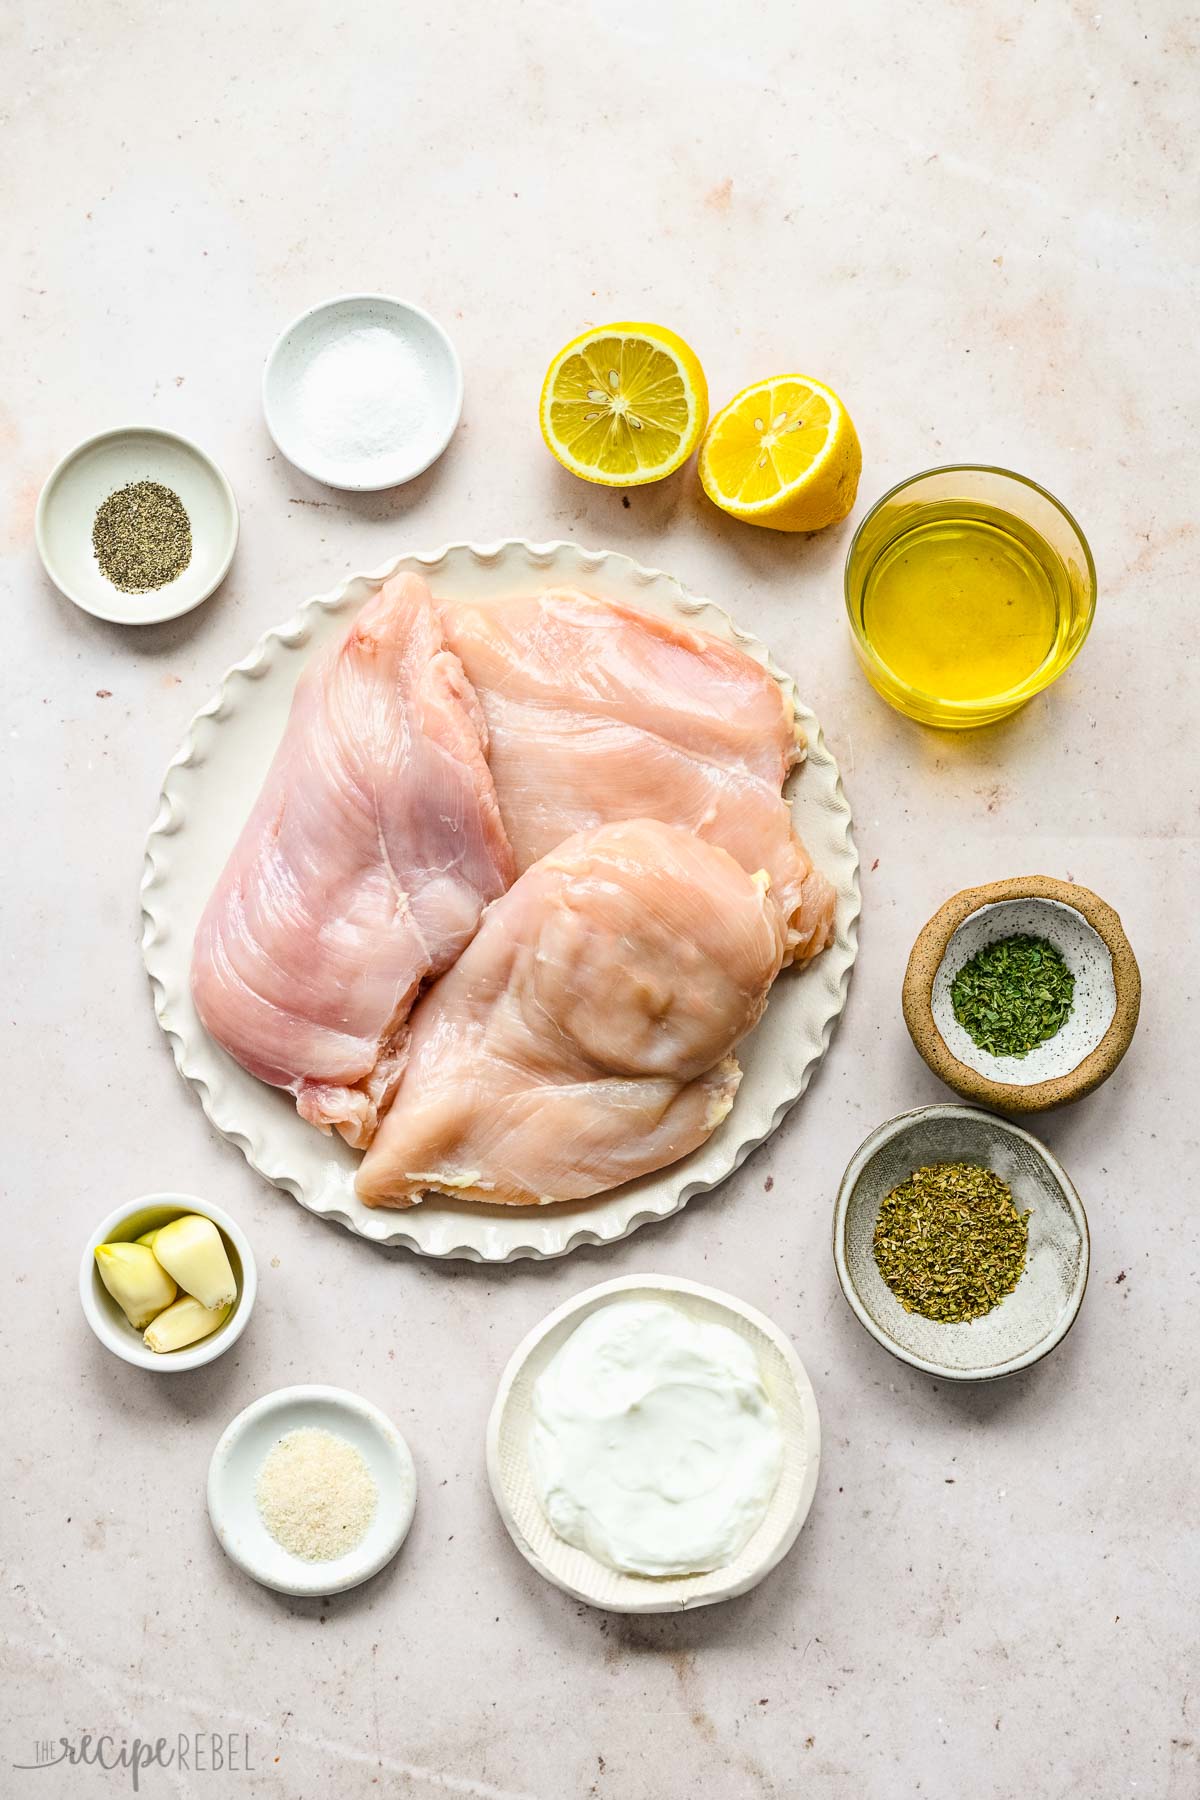 Top view of ingredients needed to make Greek chicken marinade in small bowls on the worktop. 